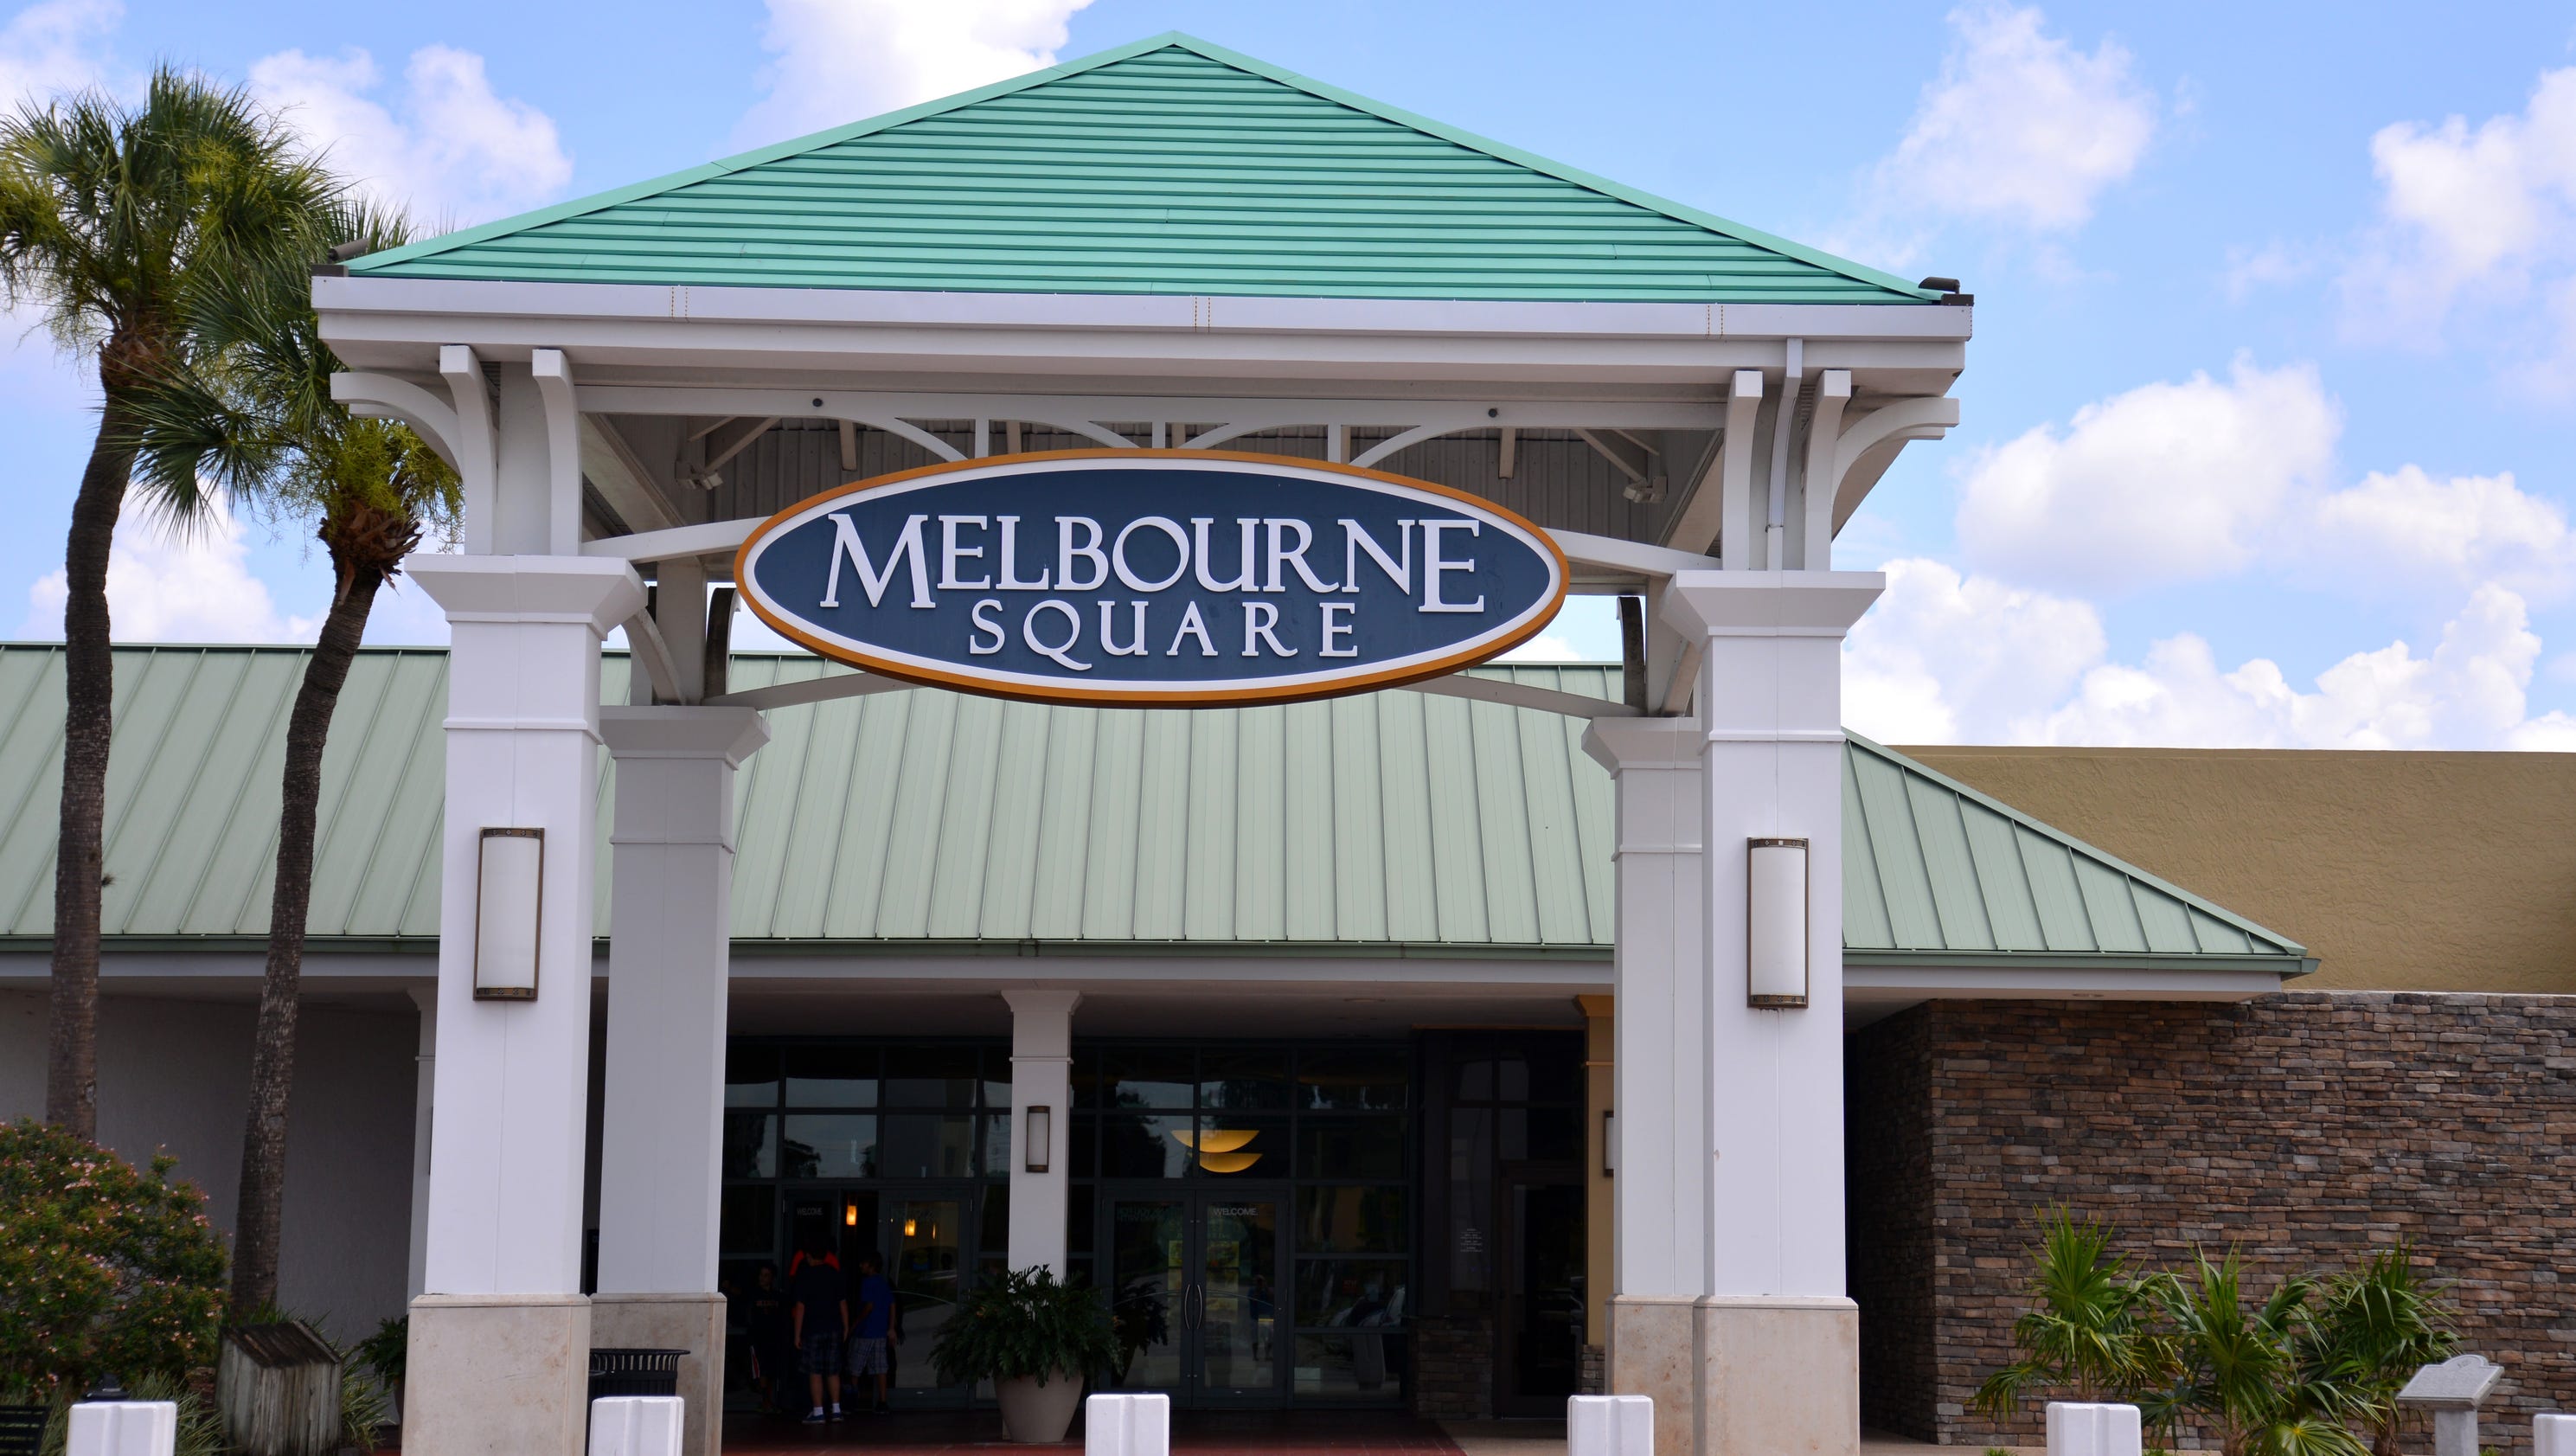 Melbourne Square mall makes moves to stay hip for shoppers